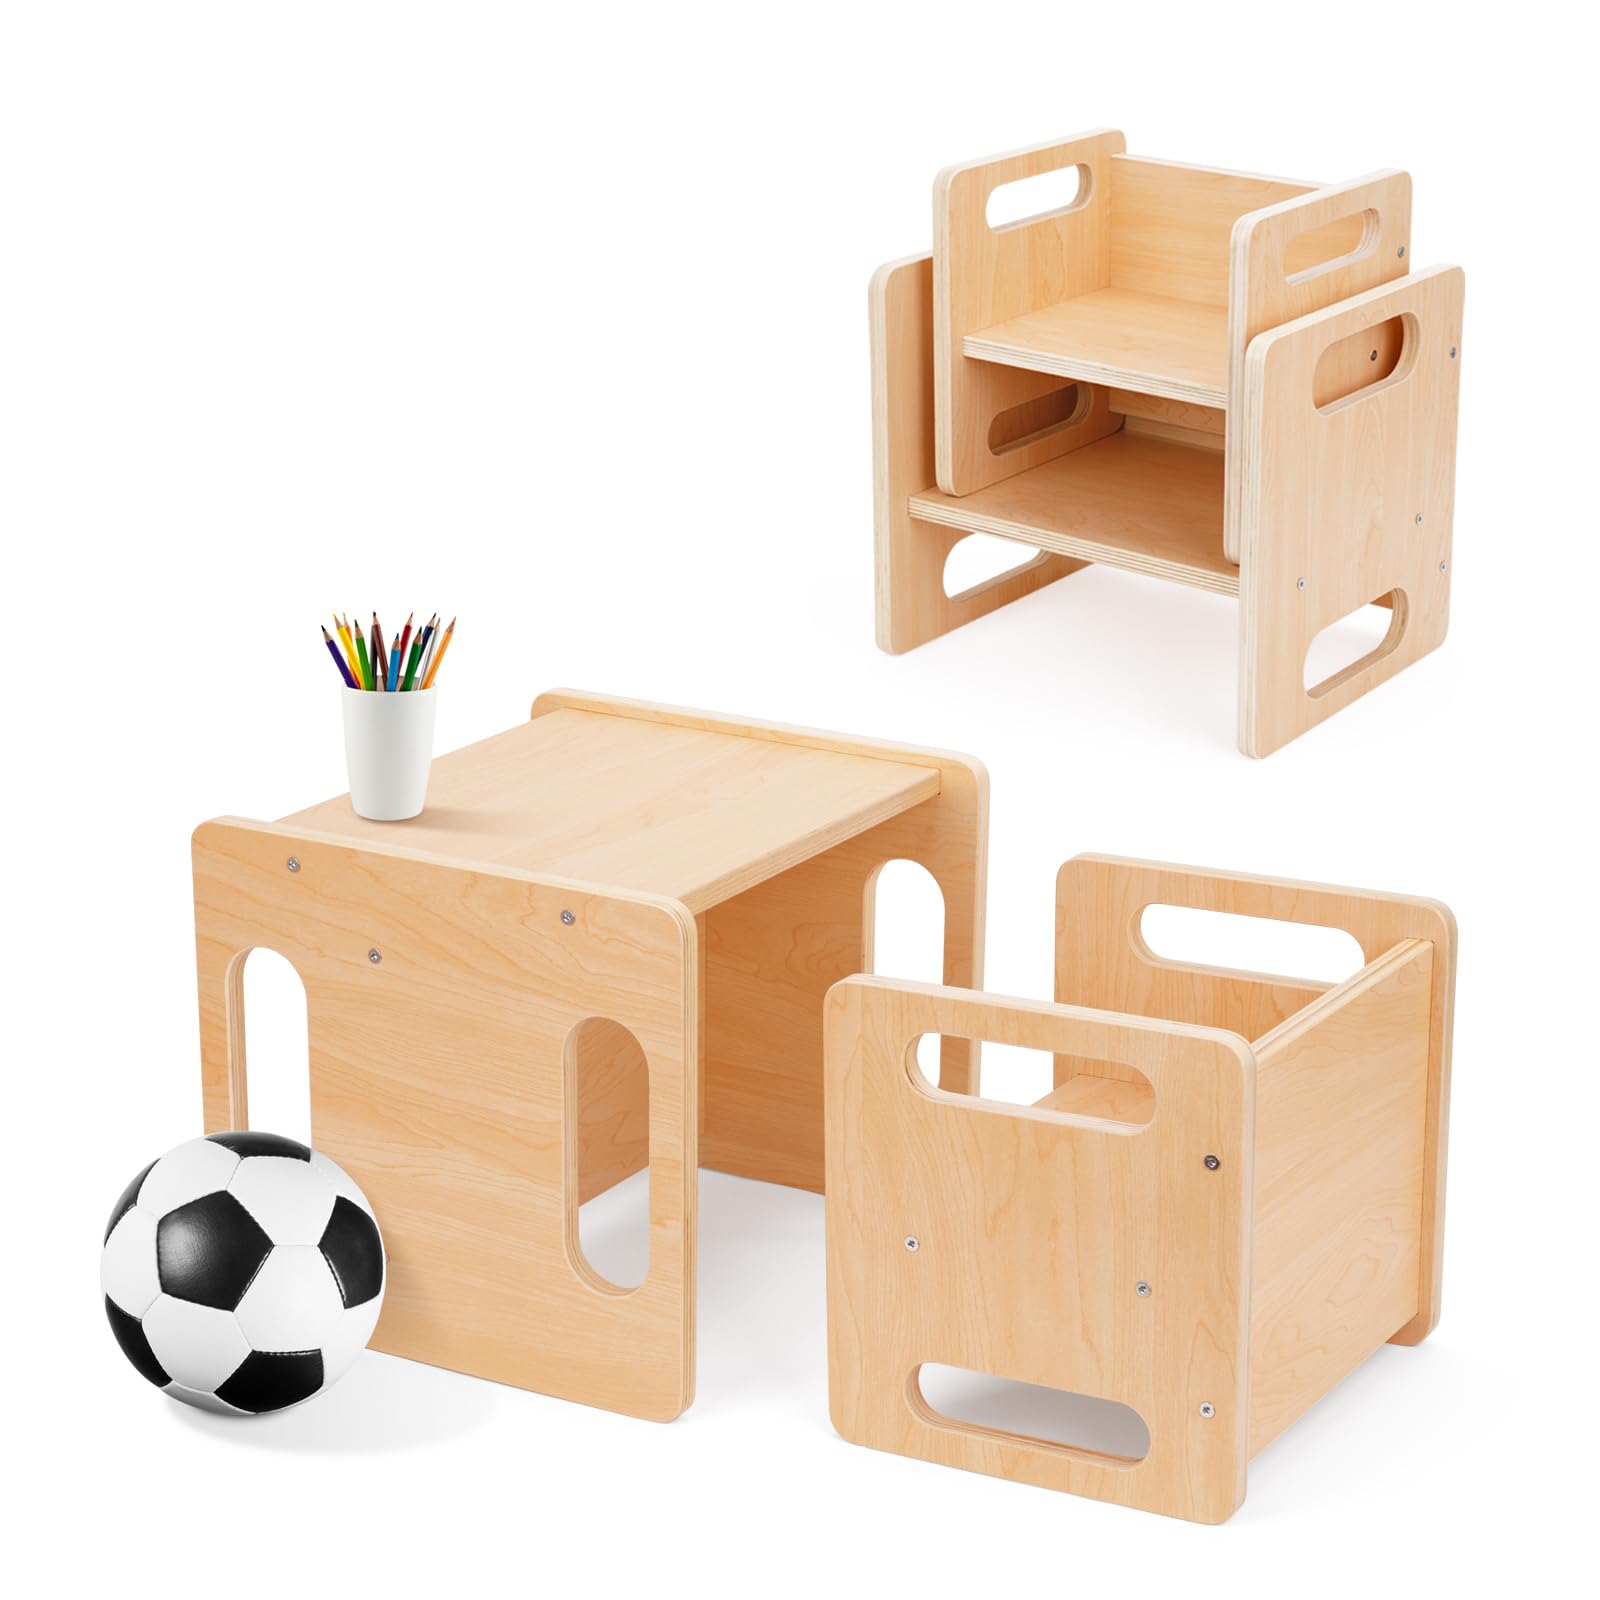 Shangrun Weaning Table And Chair Set